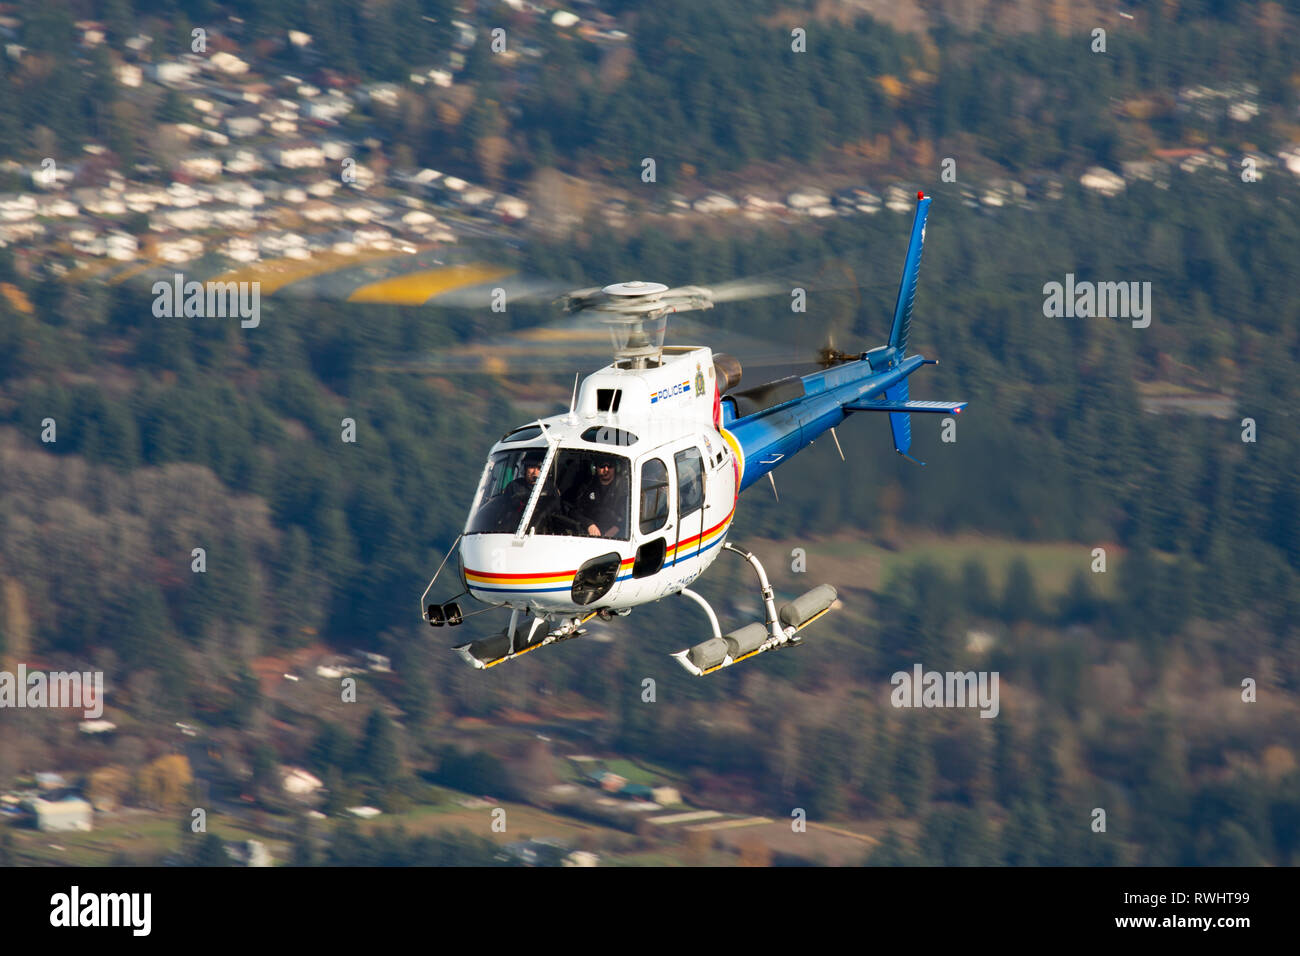 Die Royal Canadian Mounted Police helicopter, Eurocopter AS 350, fliegt in der Nähe von Nanaimo, British Columbia, Kanada Stockfoto